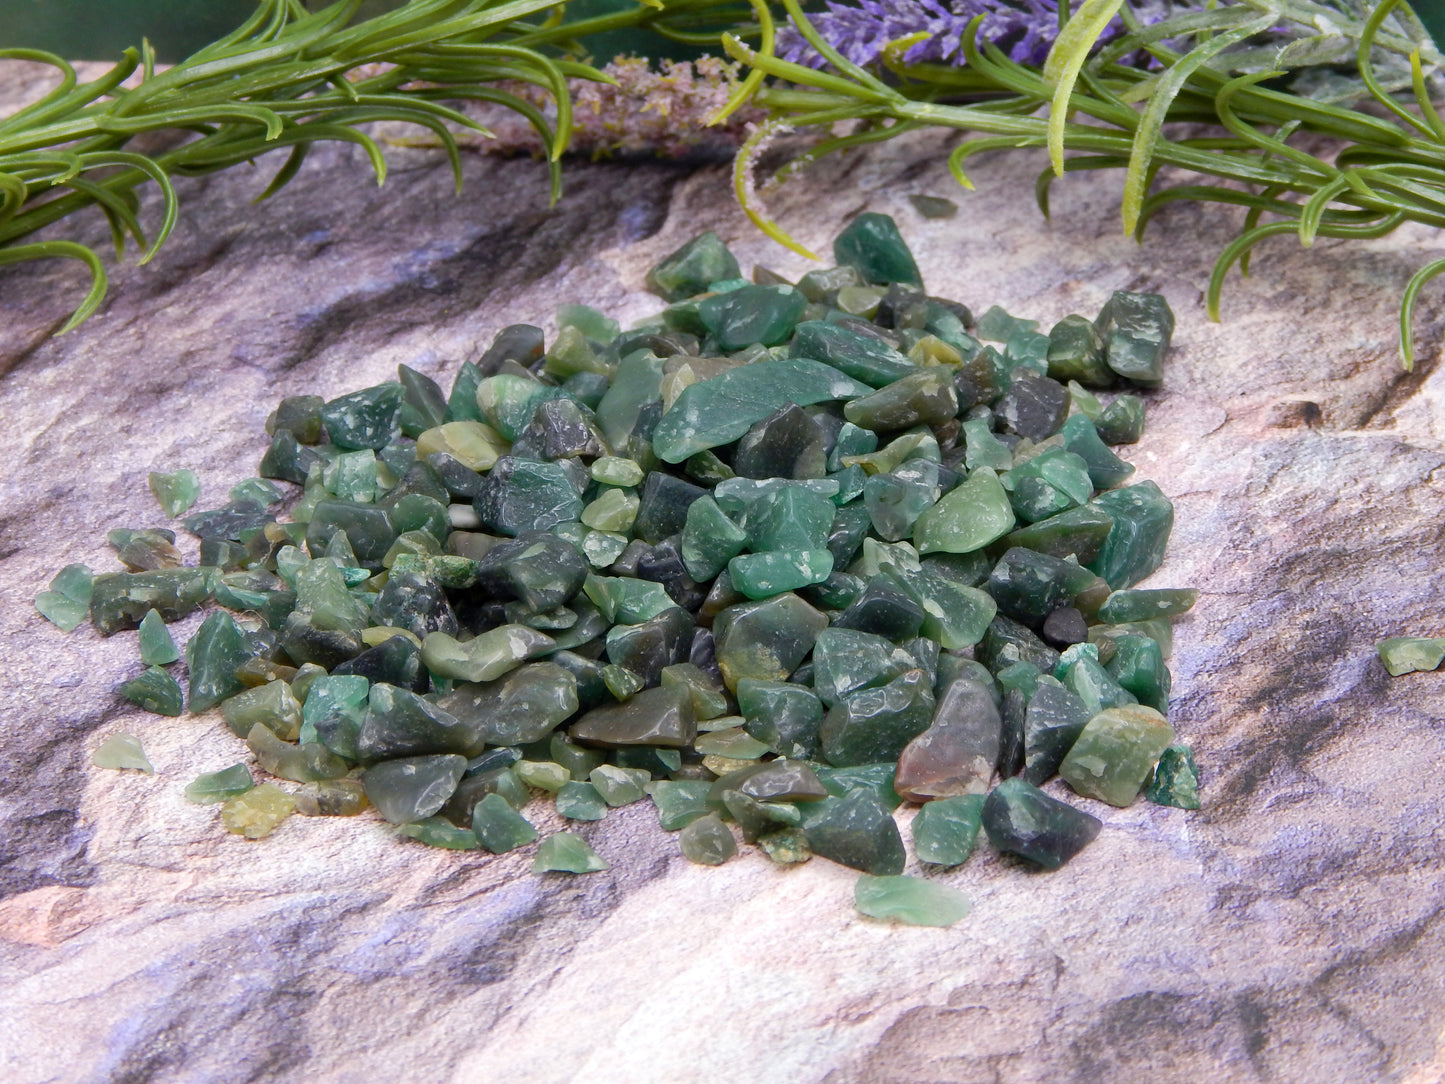 Green aventurine chips by the ounce